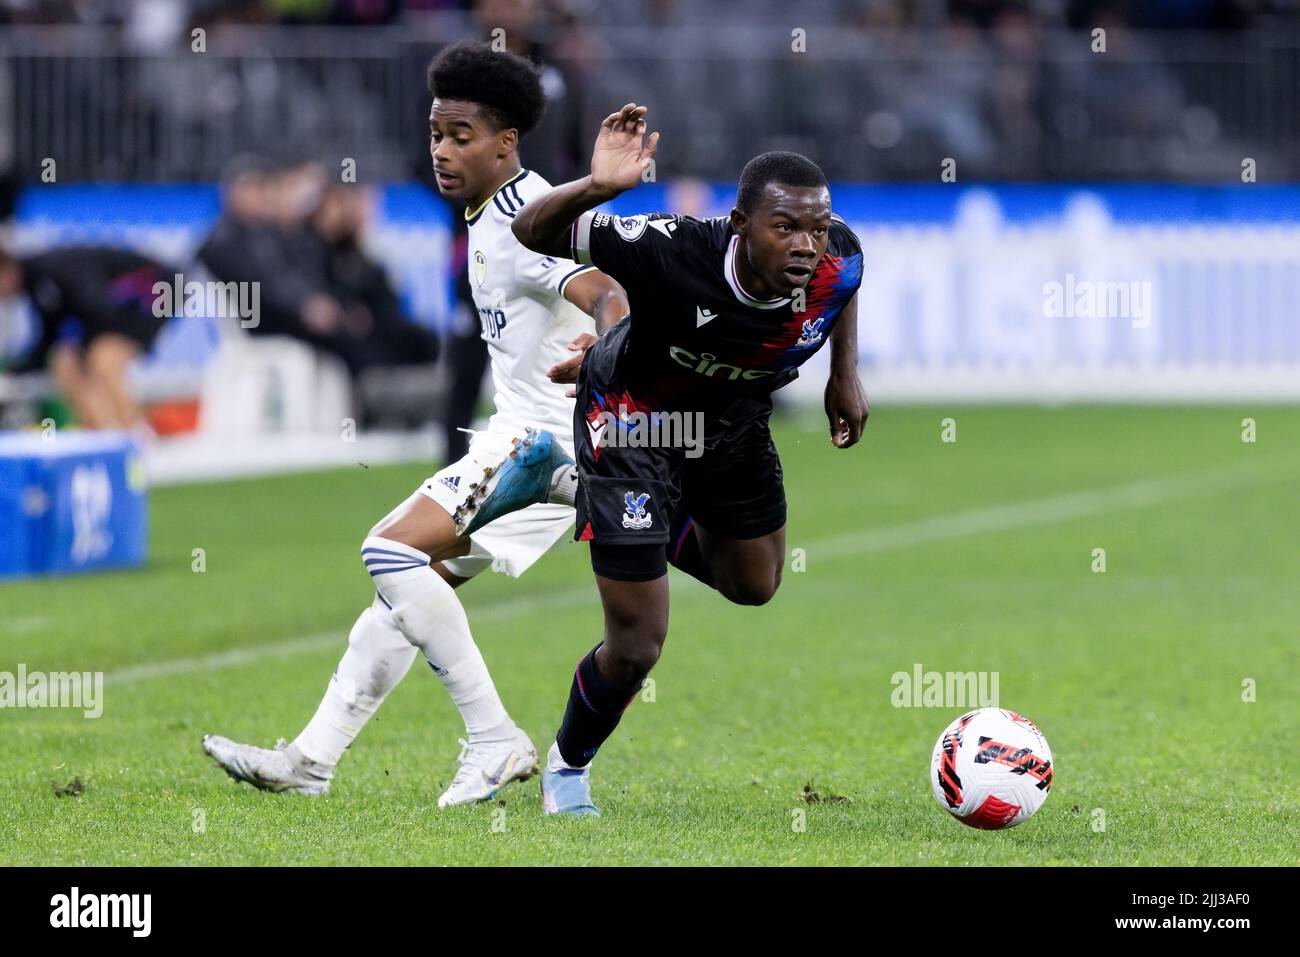 Perth, Australia, 22 July, 2022. Tyrick Mitchell of Crystal Palace runs for the ball during the ICON Festival of International Football match between Crystal Palace and Leeds United at Optus Stadium on July 22, 2022 in Perth, Australia. Credit: Graham Conaty/Speed Media/Alamy Live News Stock Photo